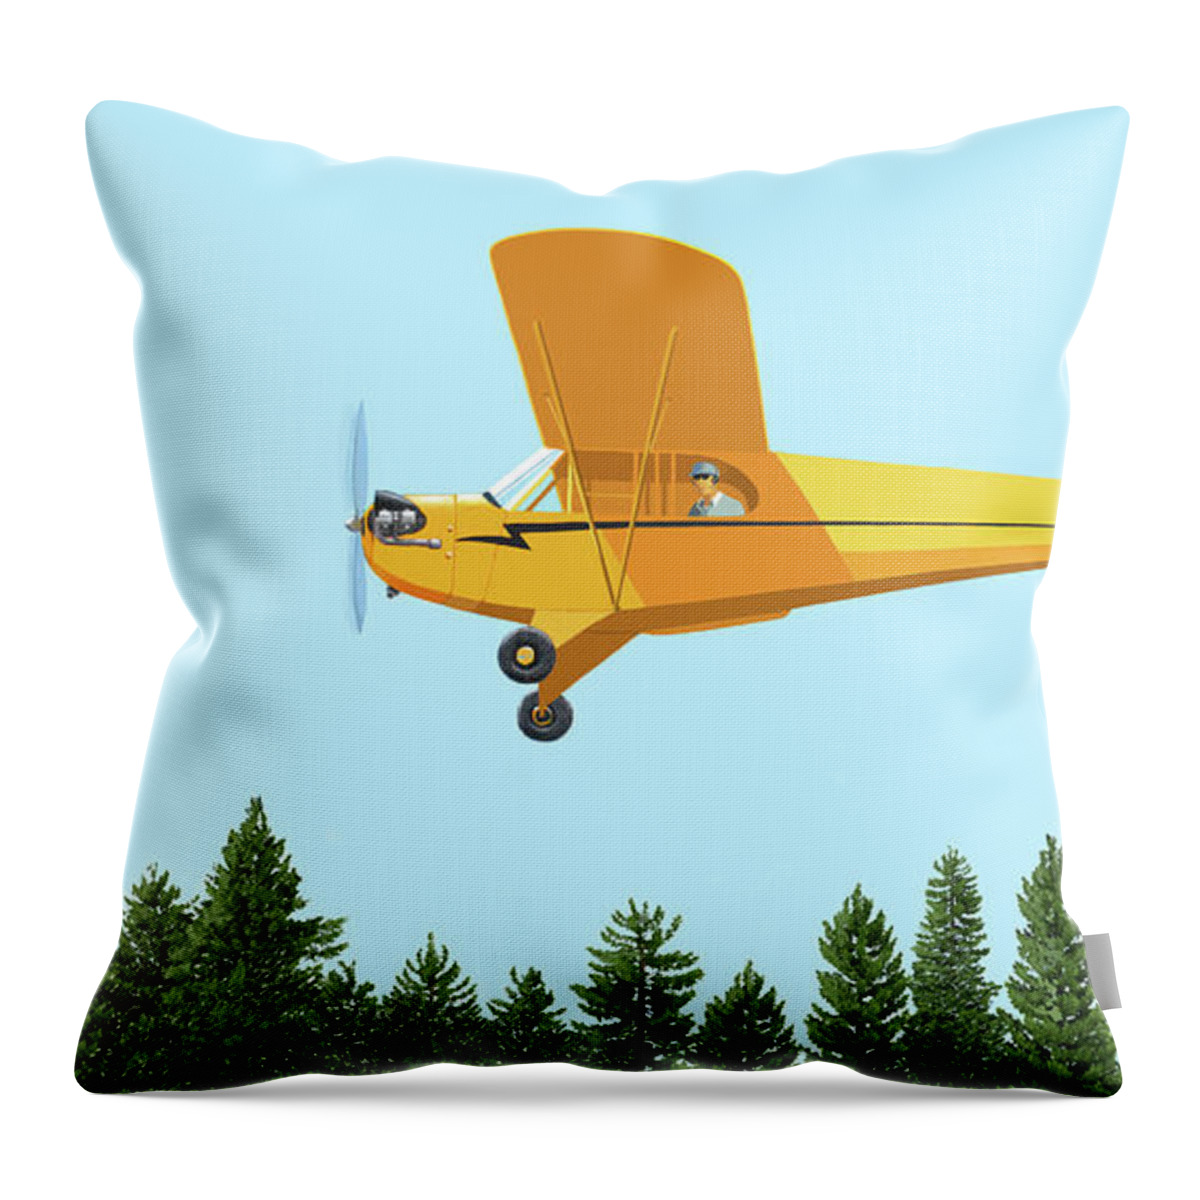 #faatoppicks Throw Pillow featuring the digital art Piper cub Piper j3 by Gary Giacomelli